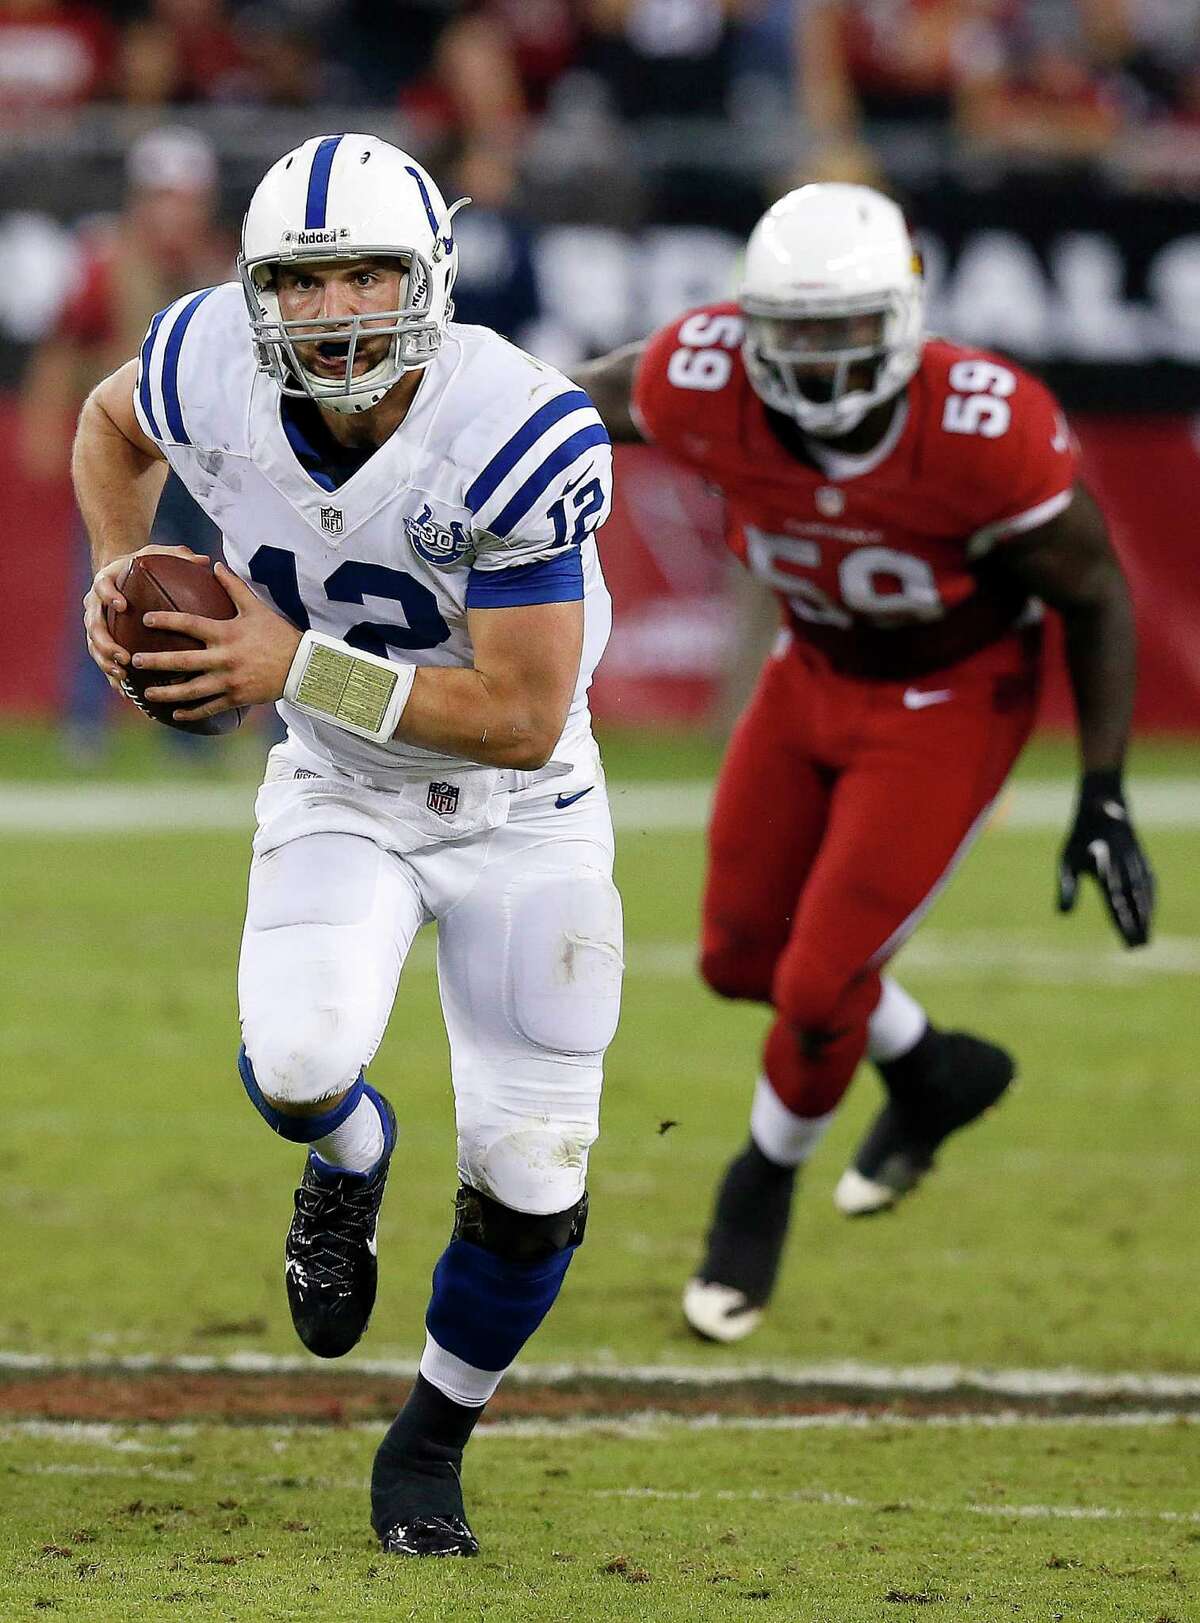 Indianapolis Colts' Andrew Luck (12) scrambles away from Arizona Cardinals' Marcus Benard (59) during the second half of an NFL football game Sunday, Nov. 24, 2013, in Glendale, Ariz. The Cardinals defeated the Colts 40-11. (AP Photo/Ross D. Franklin)